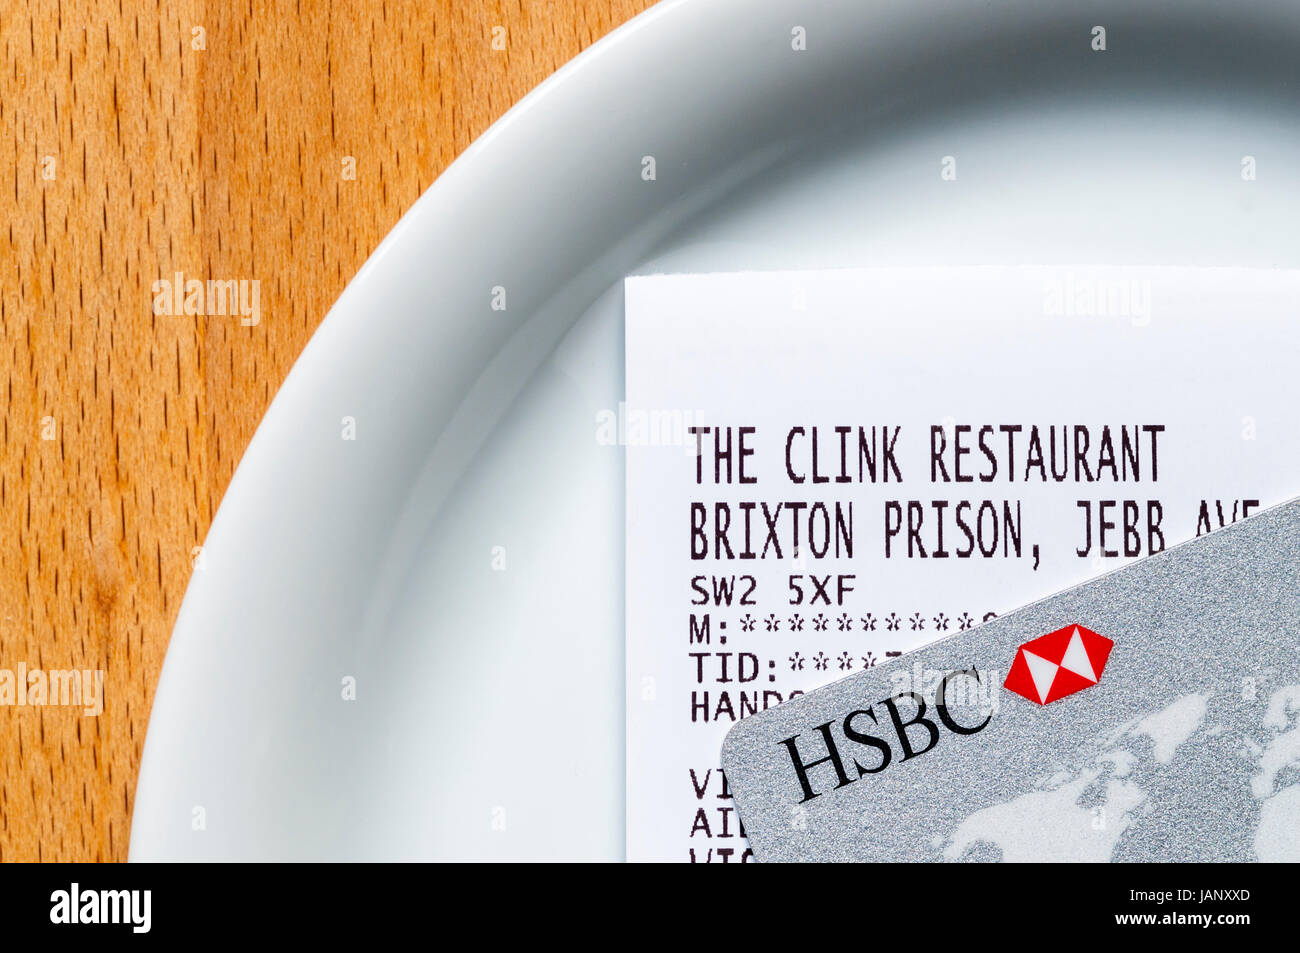 A restaurant bill from The Clink Restaurant, run by prisoners in Brixton Prison. Stock Photo